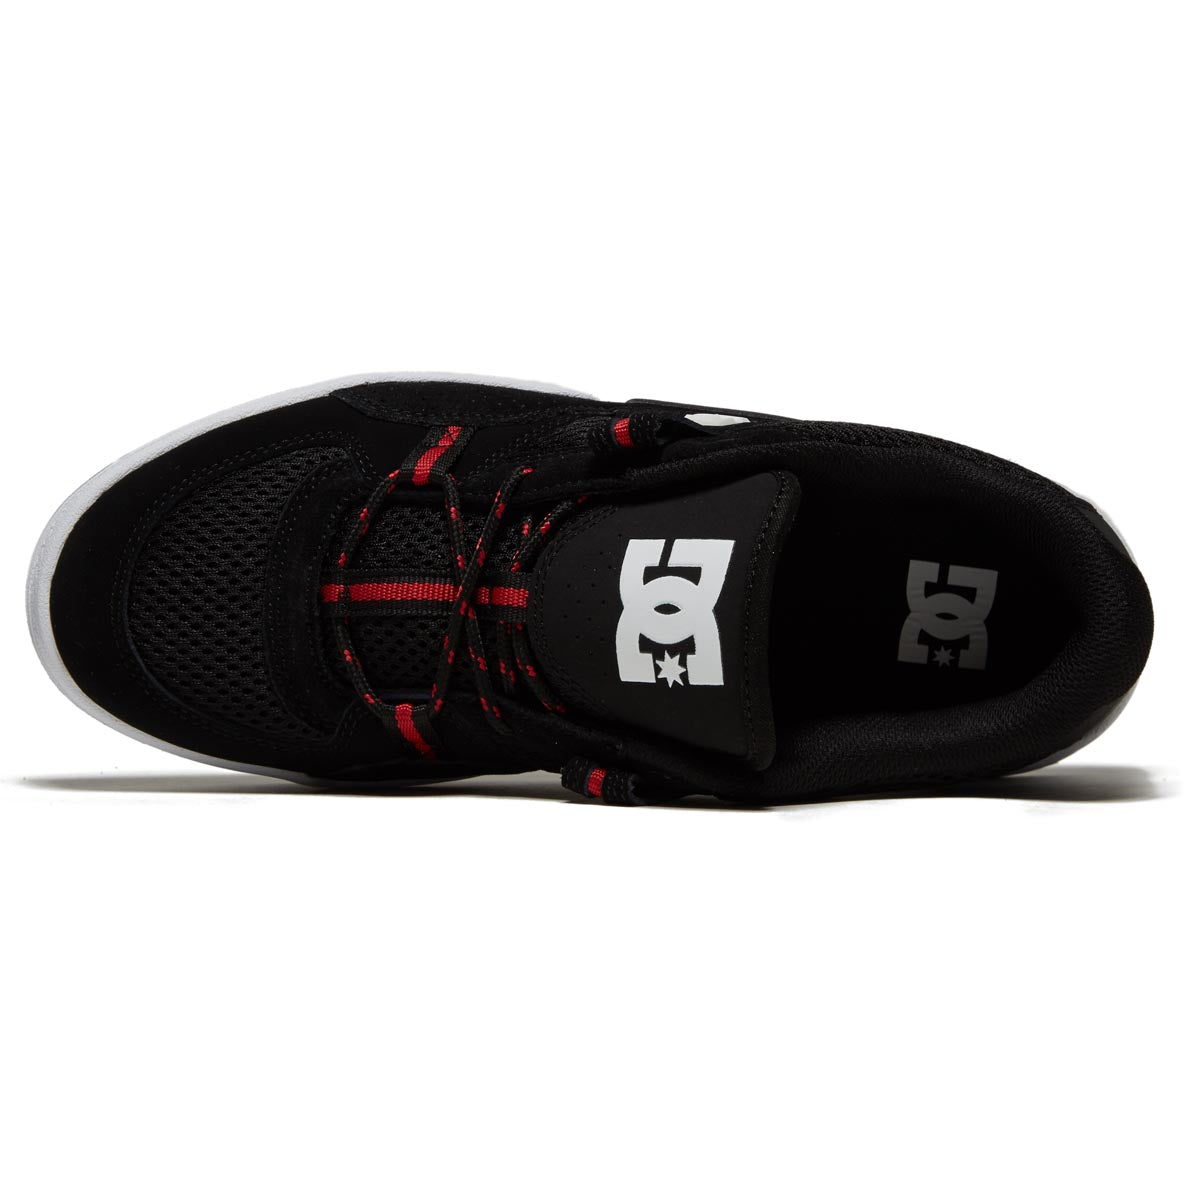 DC Construct Shoes - Black/Hot Coral image 3